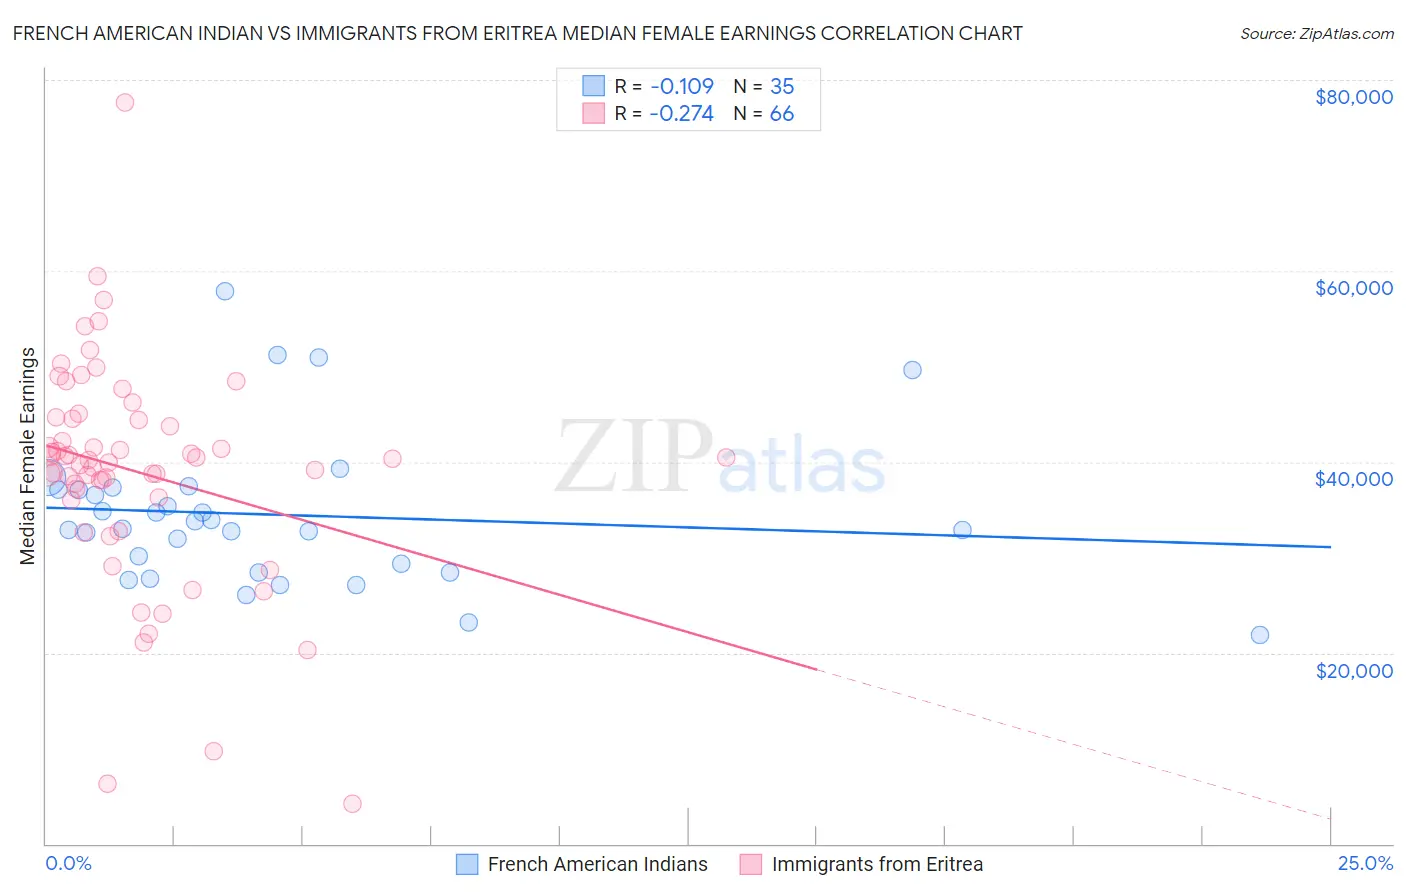 French American Indian vs Immigrants from Eritrea Median Female Earnings